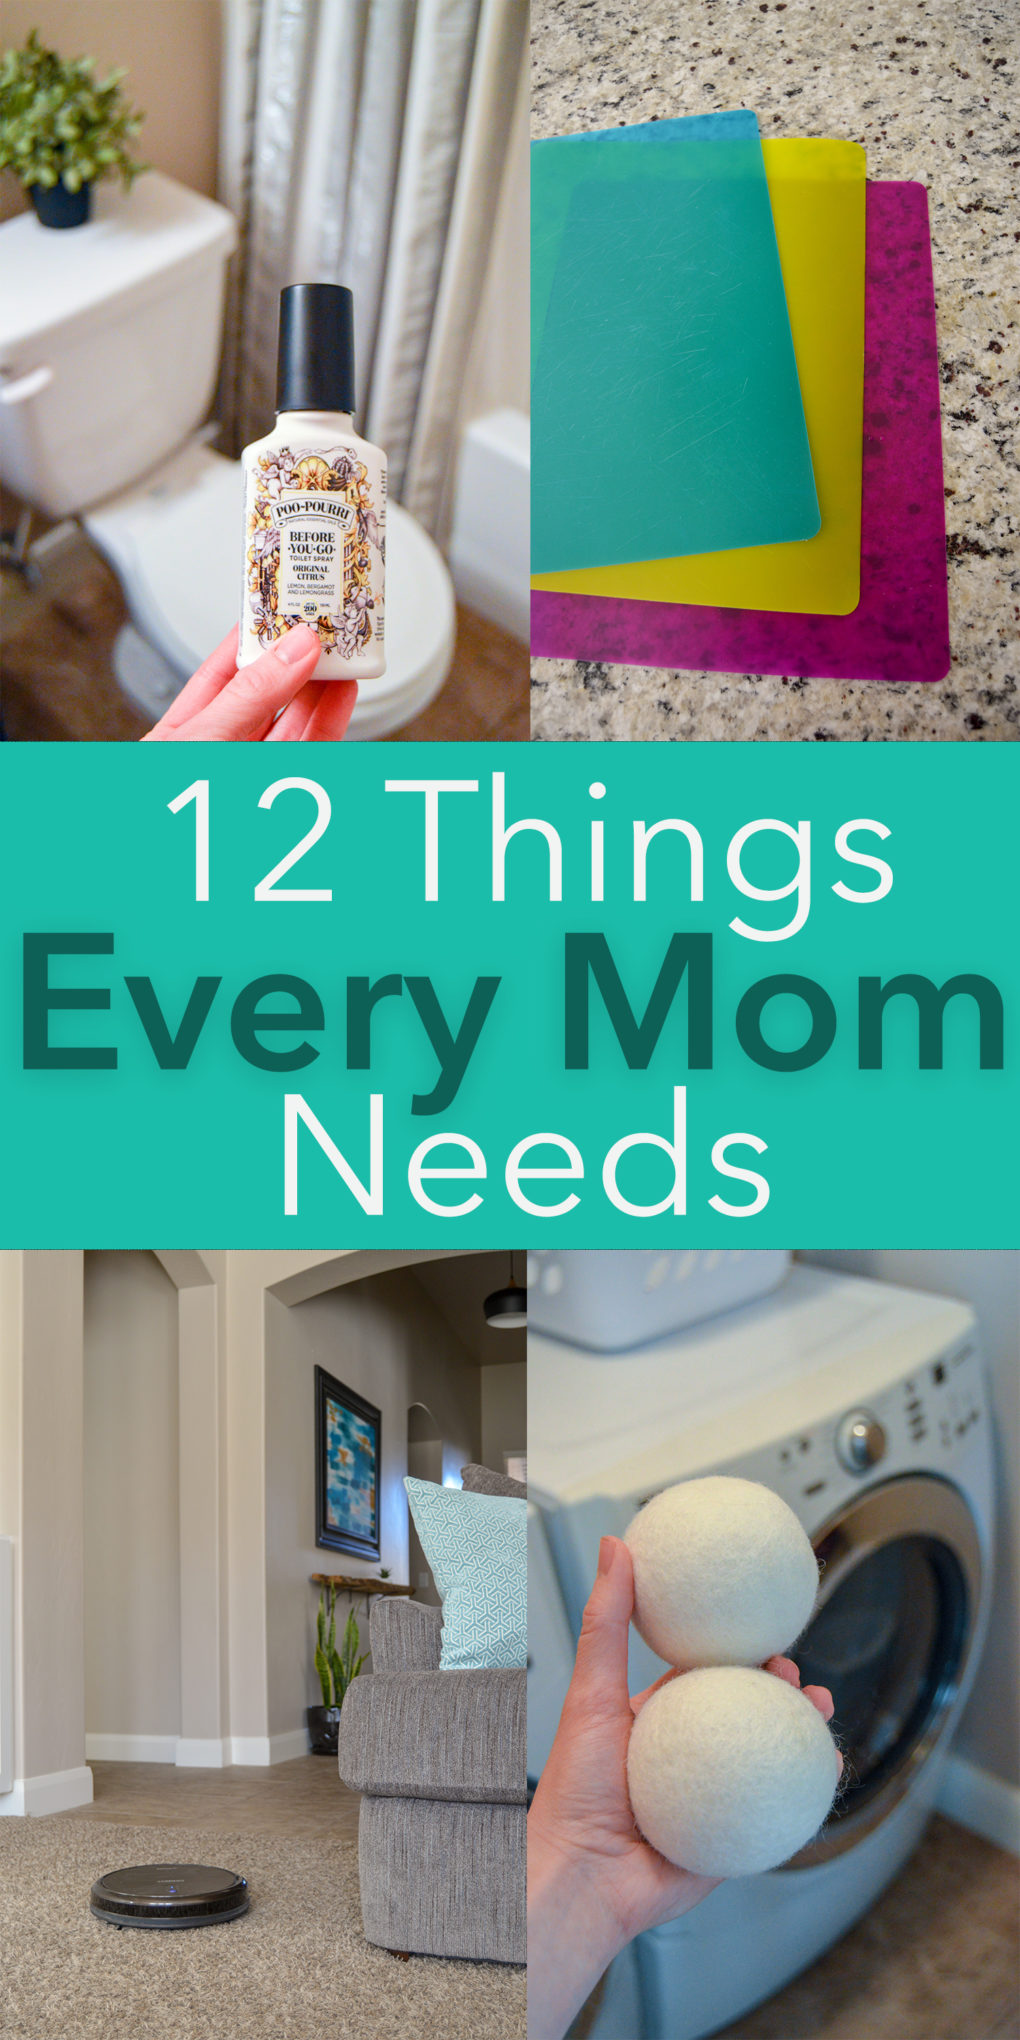 List of 12 household things every mom needs. What makes moms life easier in the kitchen, bathroom,  home. Products I love you should get! Gift ideas for mom. What a new mom needs. Baby shower, Christmas, Mother's Day, and birthday gifts for women especially moms with little kids.